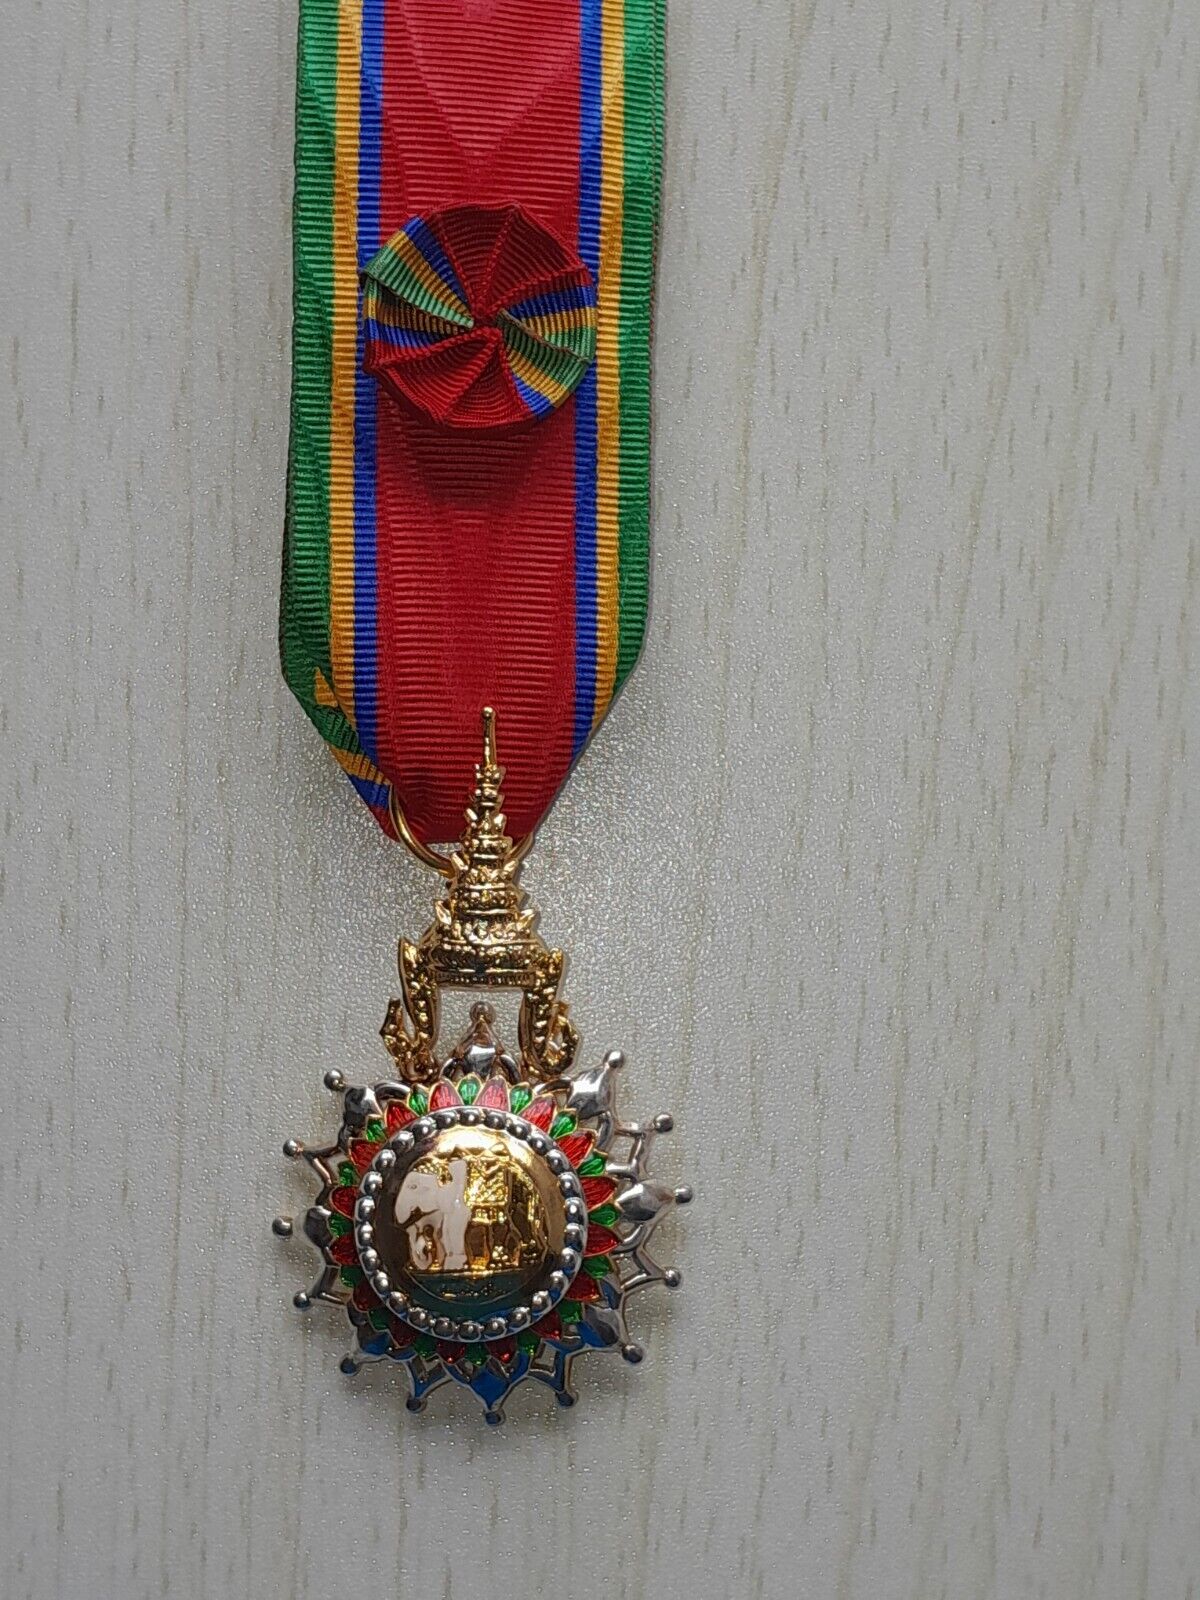 THAILAND ORDER OF THE WHITE ELEPHANT-4TH CLASS, COMPANION